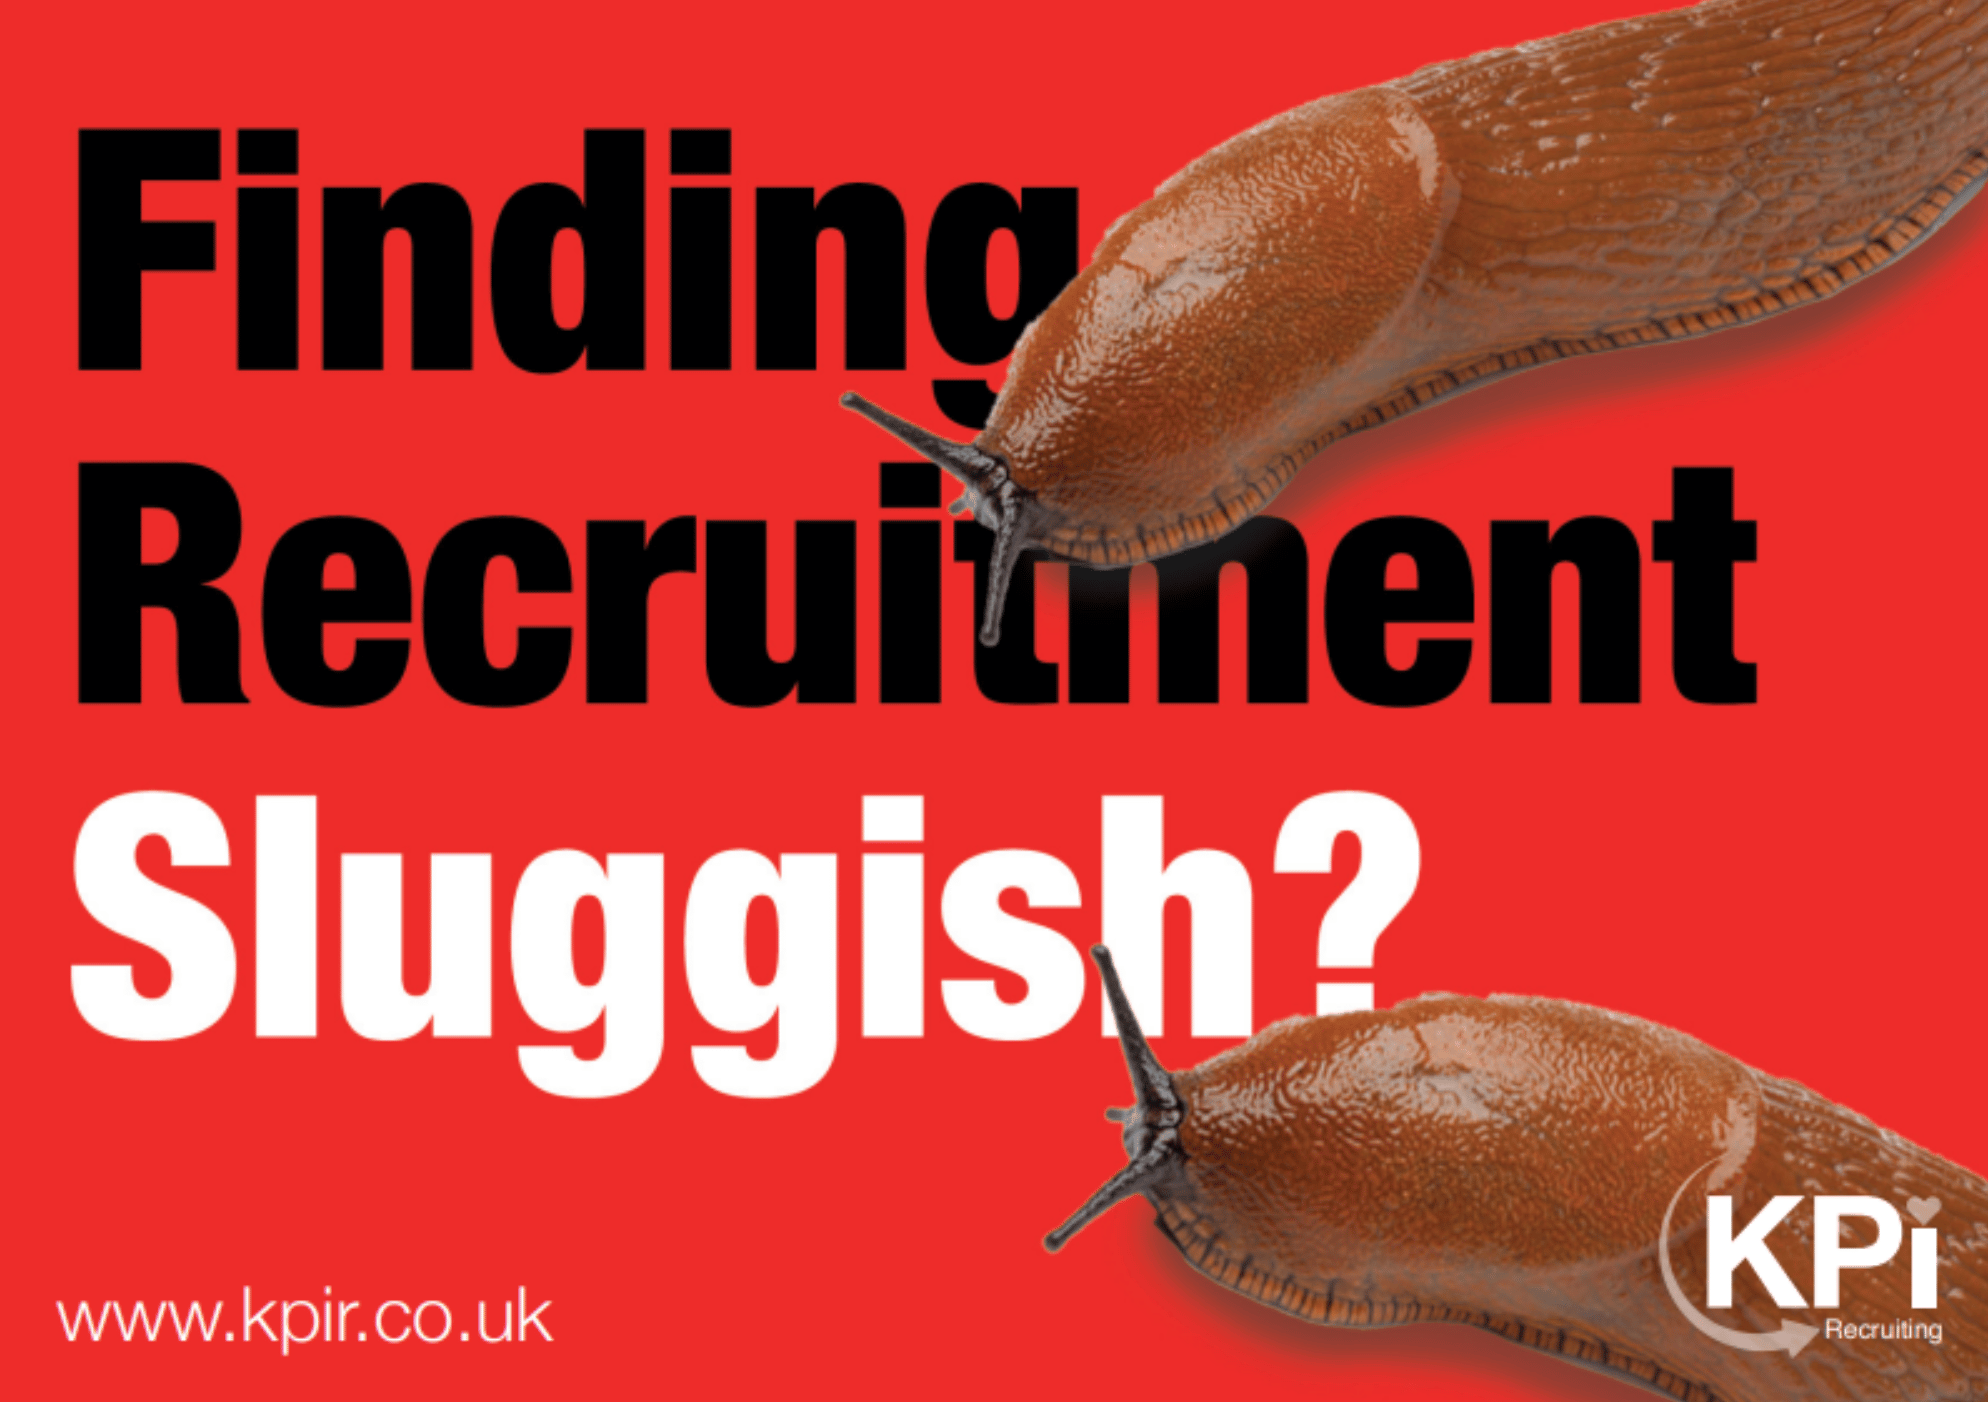 Staff attraction and retention will continue to be sluggish for businesses without a robust recruitment plan